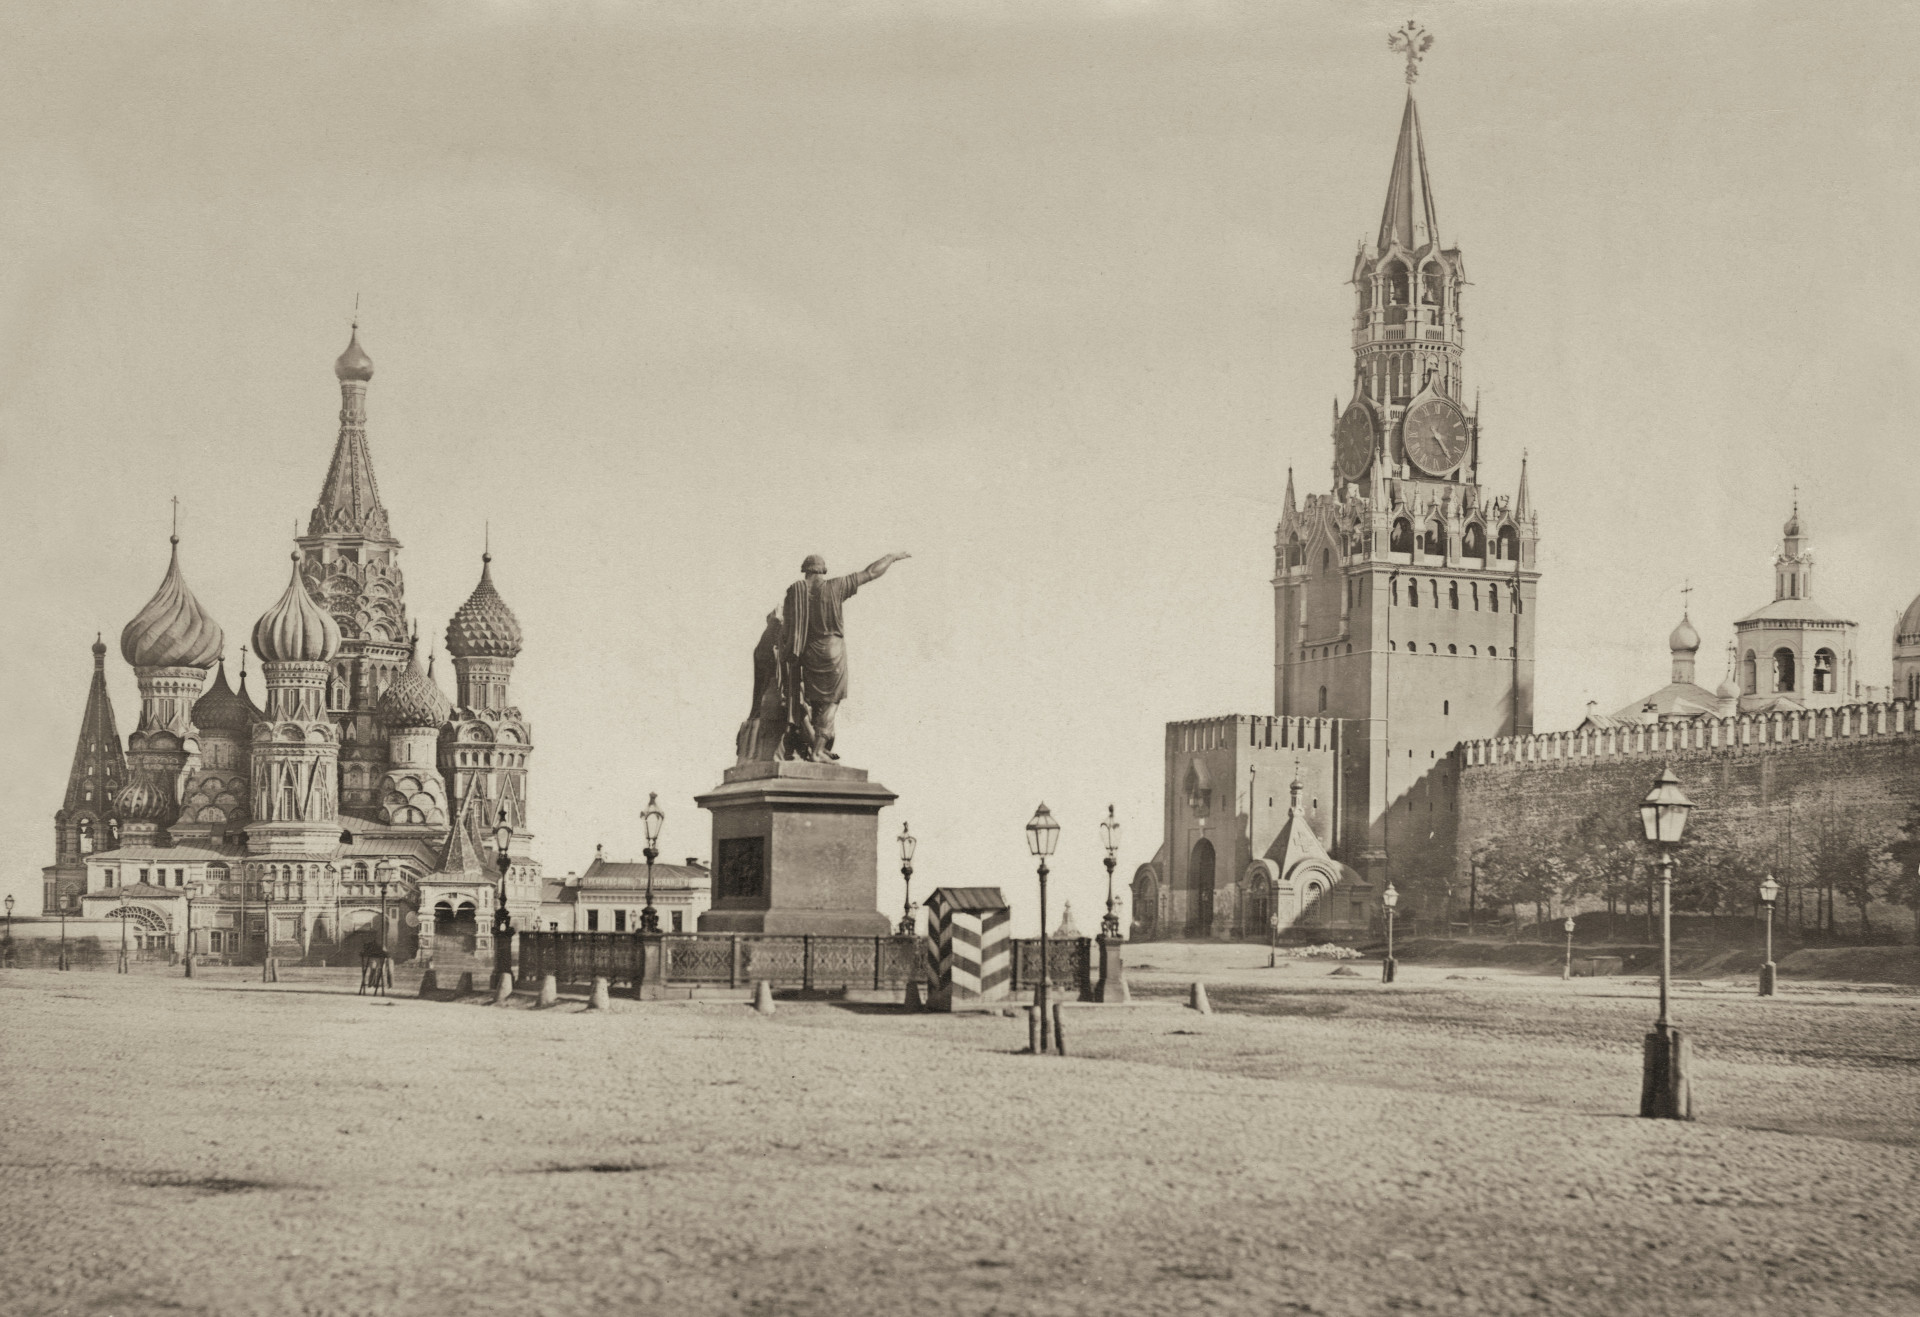 A photo from 1870 shows Soviet <a href="https://uk.starsinsider.com/travel/156896/russian-figures-who-made-history" rel="noopener">Russia</a>'s Red Square and its iconic monuments.<p><a href="https://www.msn.com/en-us/community/channel/vid-7xx8mnucu55yw63we9va2gwr7uihbxwc68fxqp25x6tg4ftibpra?cvid=94631541bc0f4f89bfd59158d696ad7e">Follow us and access great exclusive content every day</a></p>